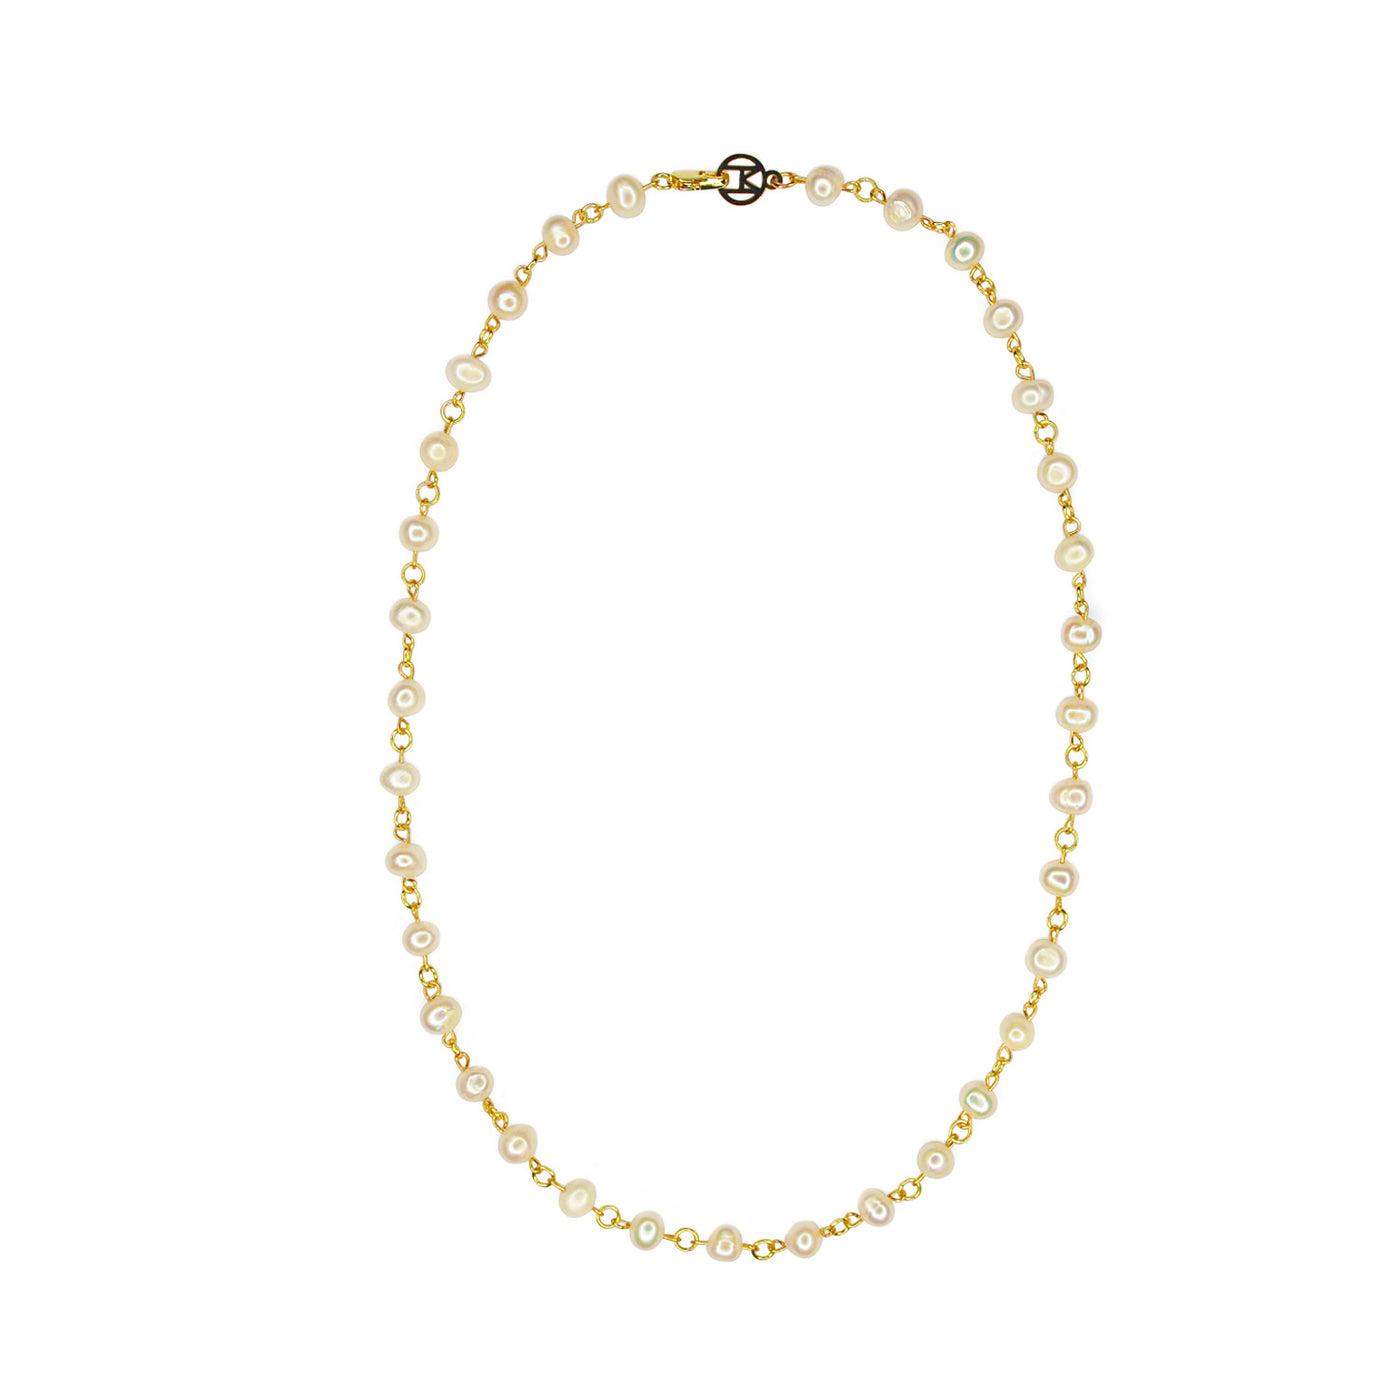 Linked 14k Gold Pearl Necklace